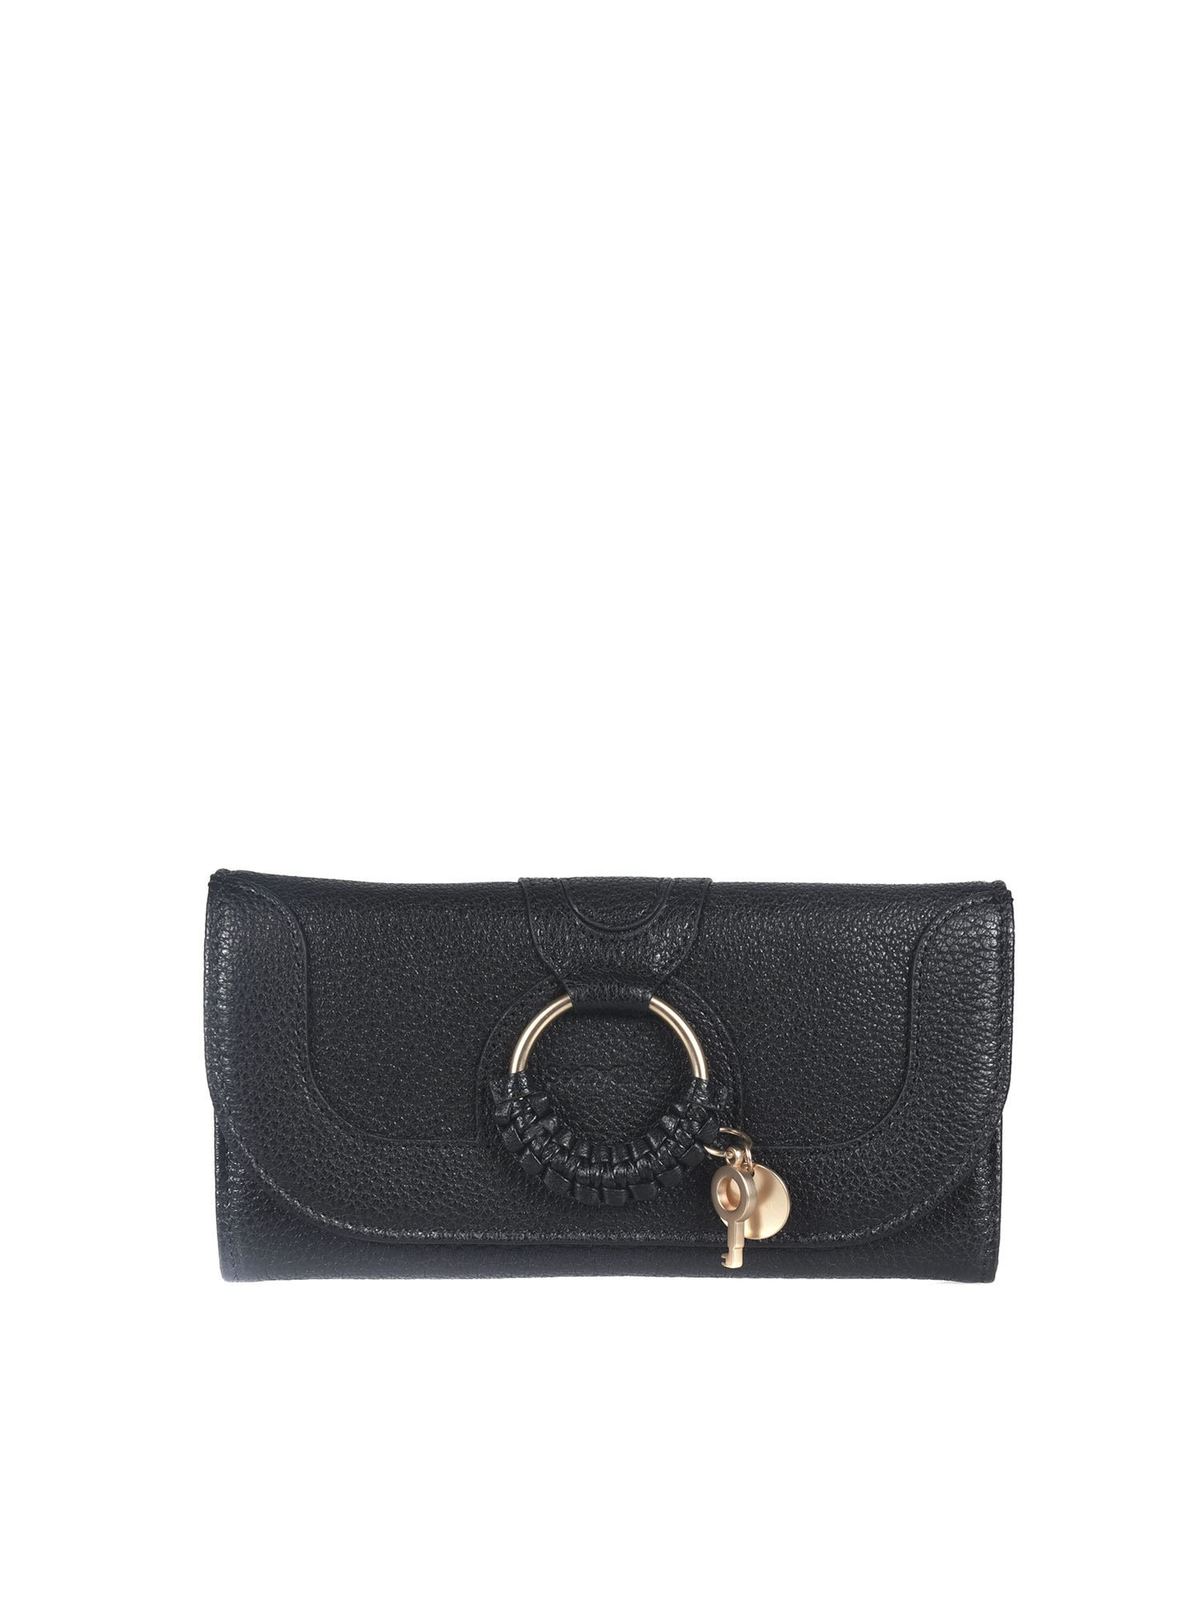 See By Chloé Hana Continental Wallet In Black